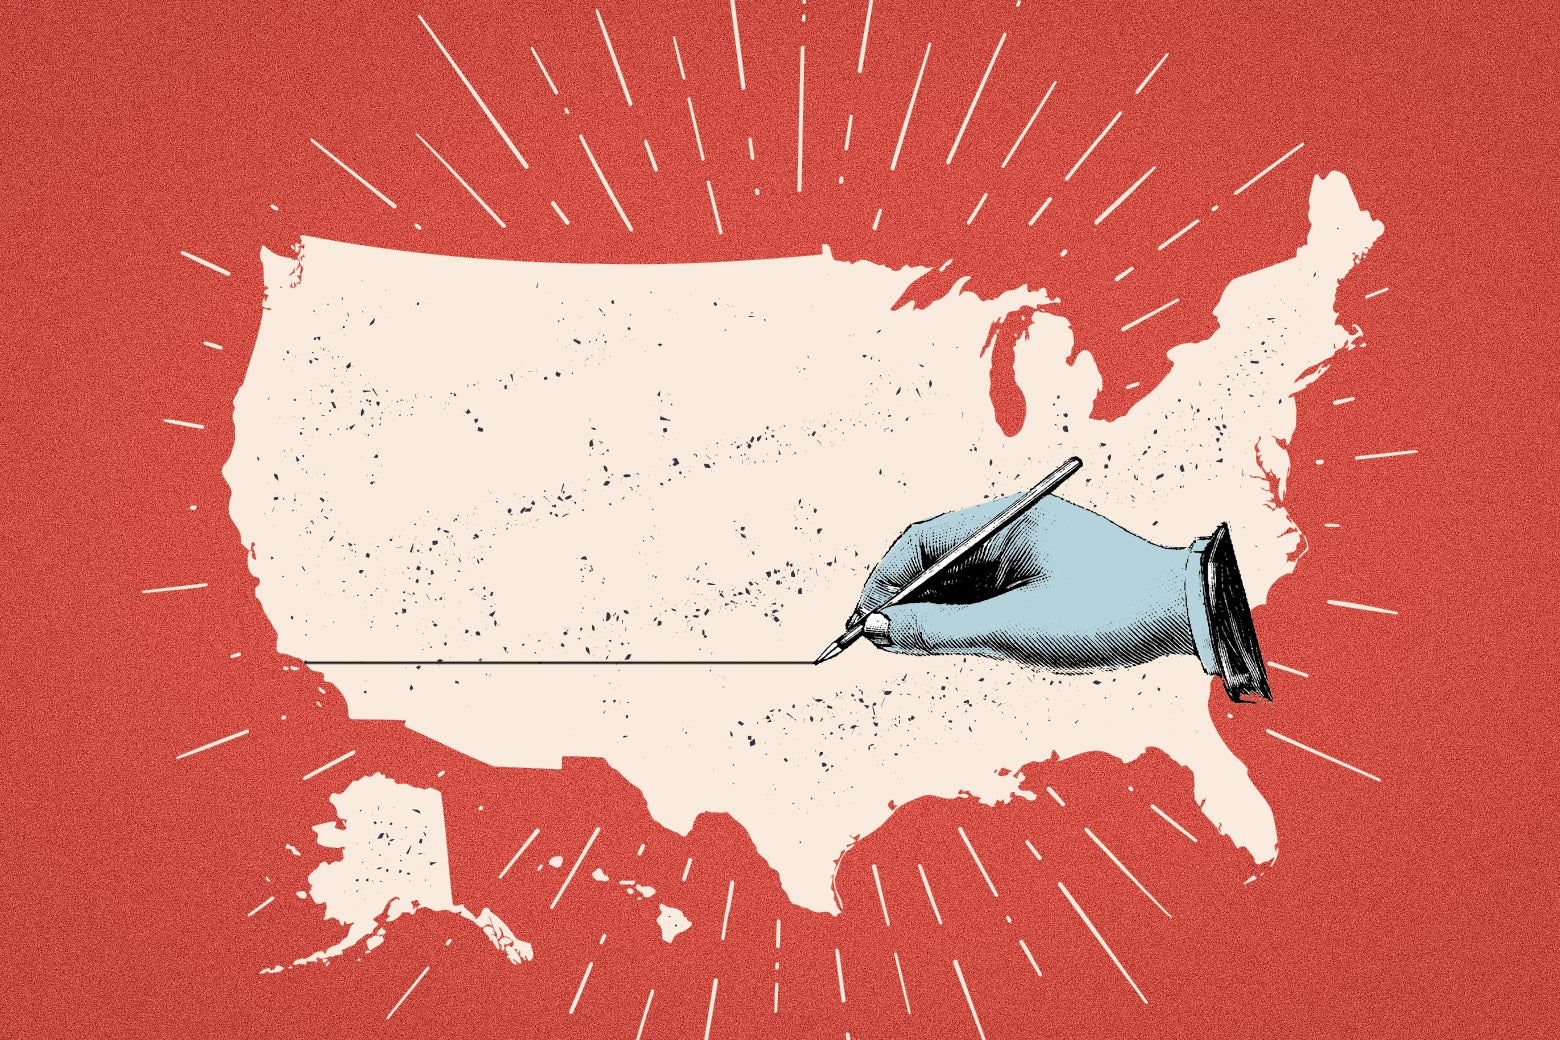 An illustration of a hand, drawing a line across America.